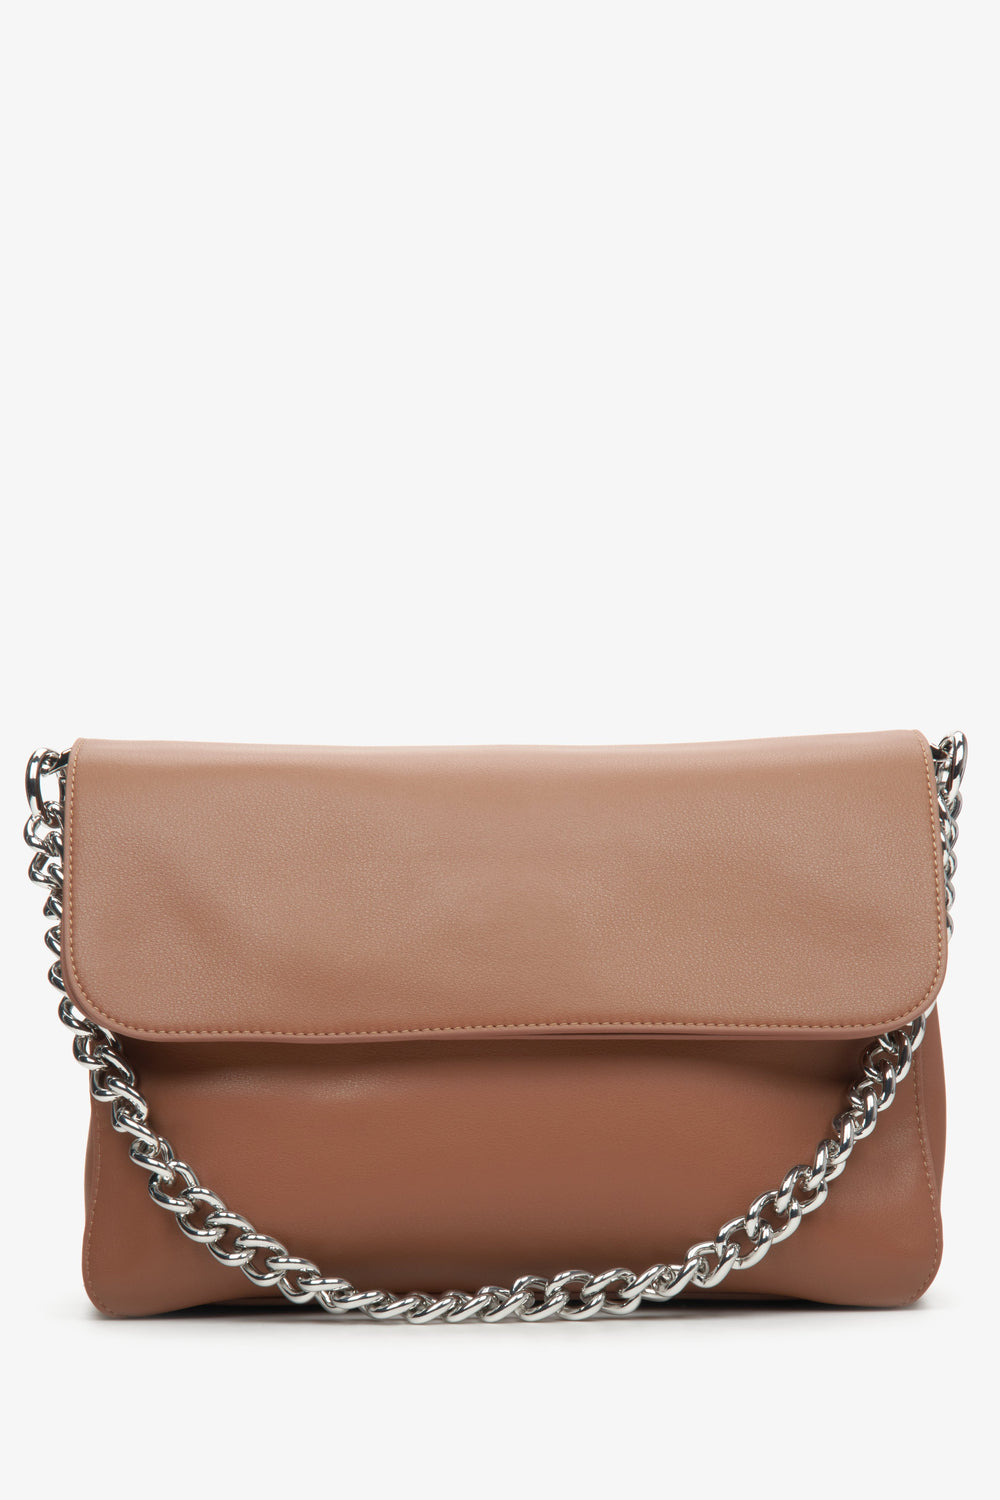 Women's Brown Crossbody Bag with Chain made of Genuine Leather Estro ER00113762.